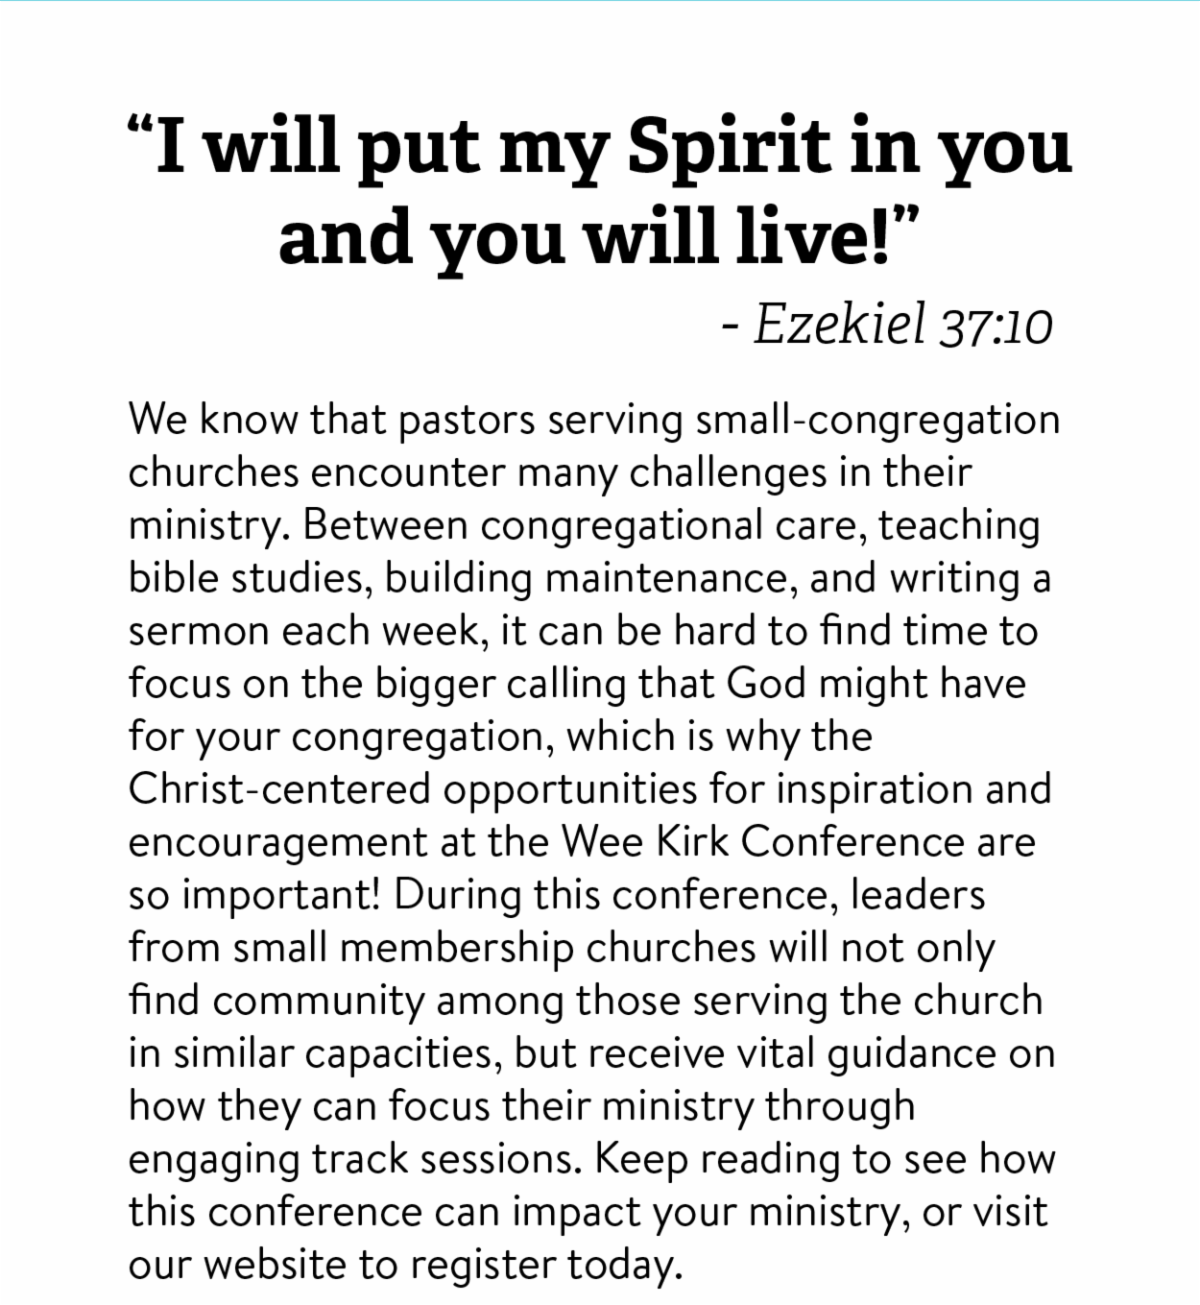 "I will put my spirit in you and you will live!" - Ezekiel 37:10 -- We know that pastors serving small-congregation churches encounter many challenges in their ministry. Between congregational care, teaching bible studies, building maintenance, and writing a sermon each week, it can be hard to find time to focus on the bigger calling that God might have for your congregation, which is why the Christ-centered opportunities for inspiration and encouragement at the Wee Kirk Conference are so important! During this conference, leaders from small membership churches will not only find community among those serving the church in similar capacities, but receive vital guidance on how they can focus their ministry through engaging track sessions. Keep reading to see how this conference can impact your ministry, or visit our website to register today. 